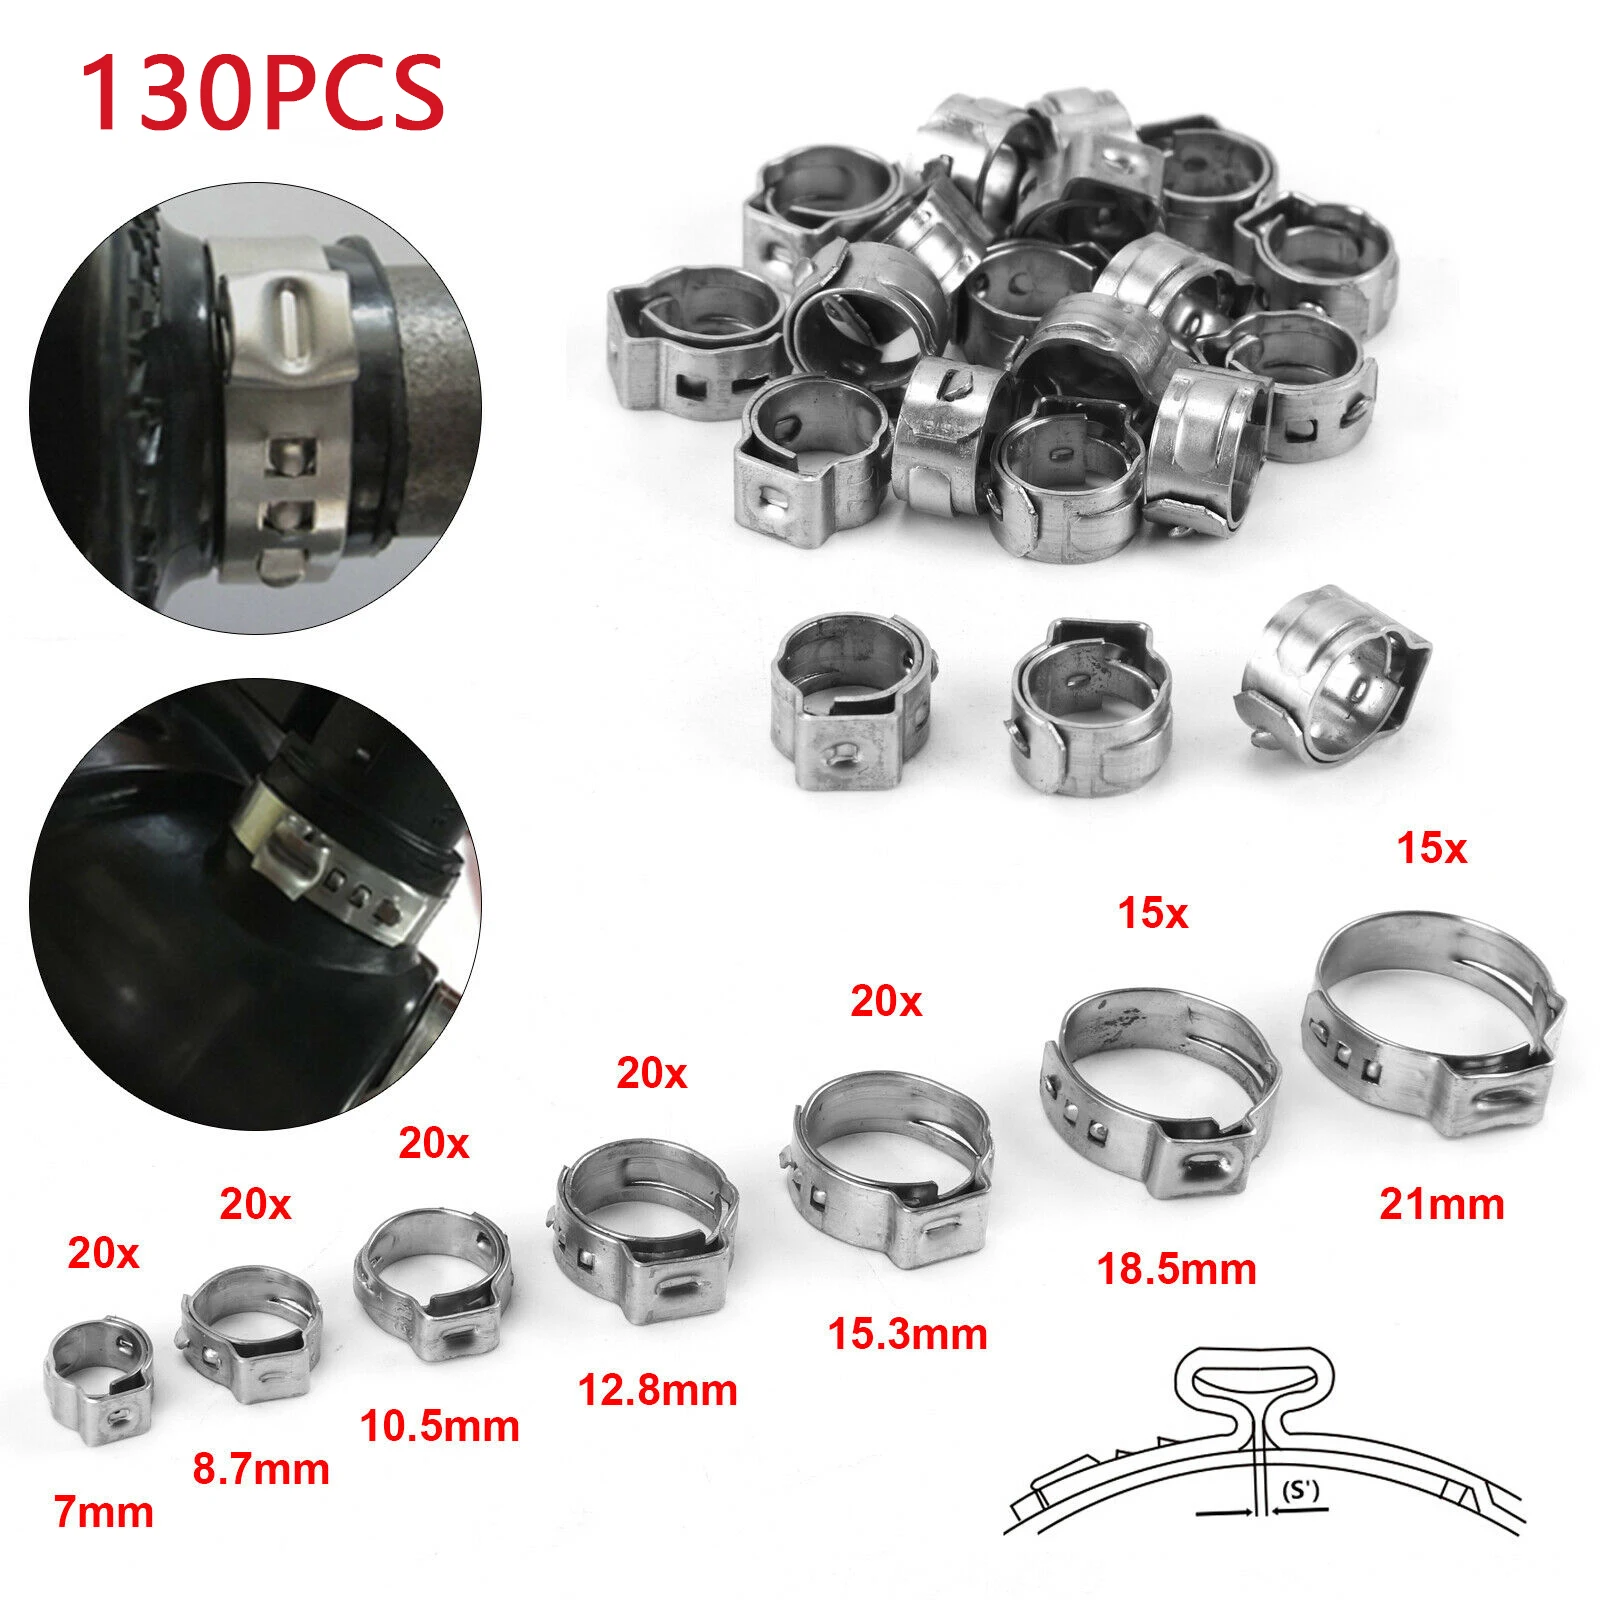 140pcs 304 Stainless Steel Single Ear & Clamp/Ear Hose Clamps Crimping Tool Kit 